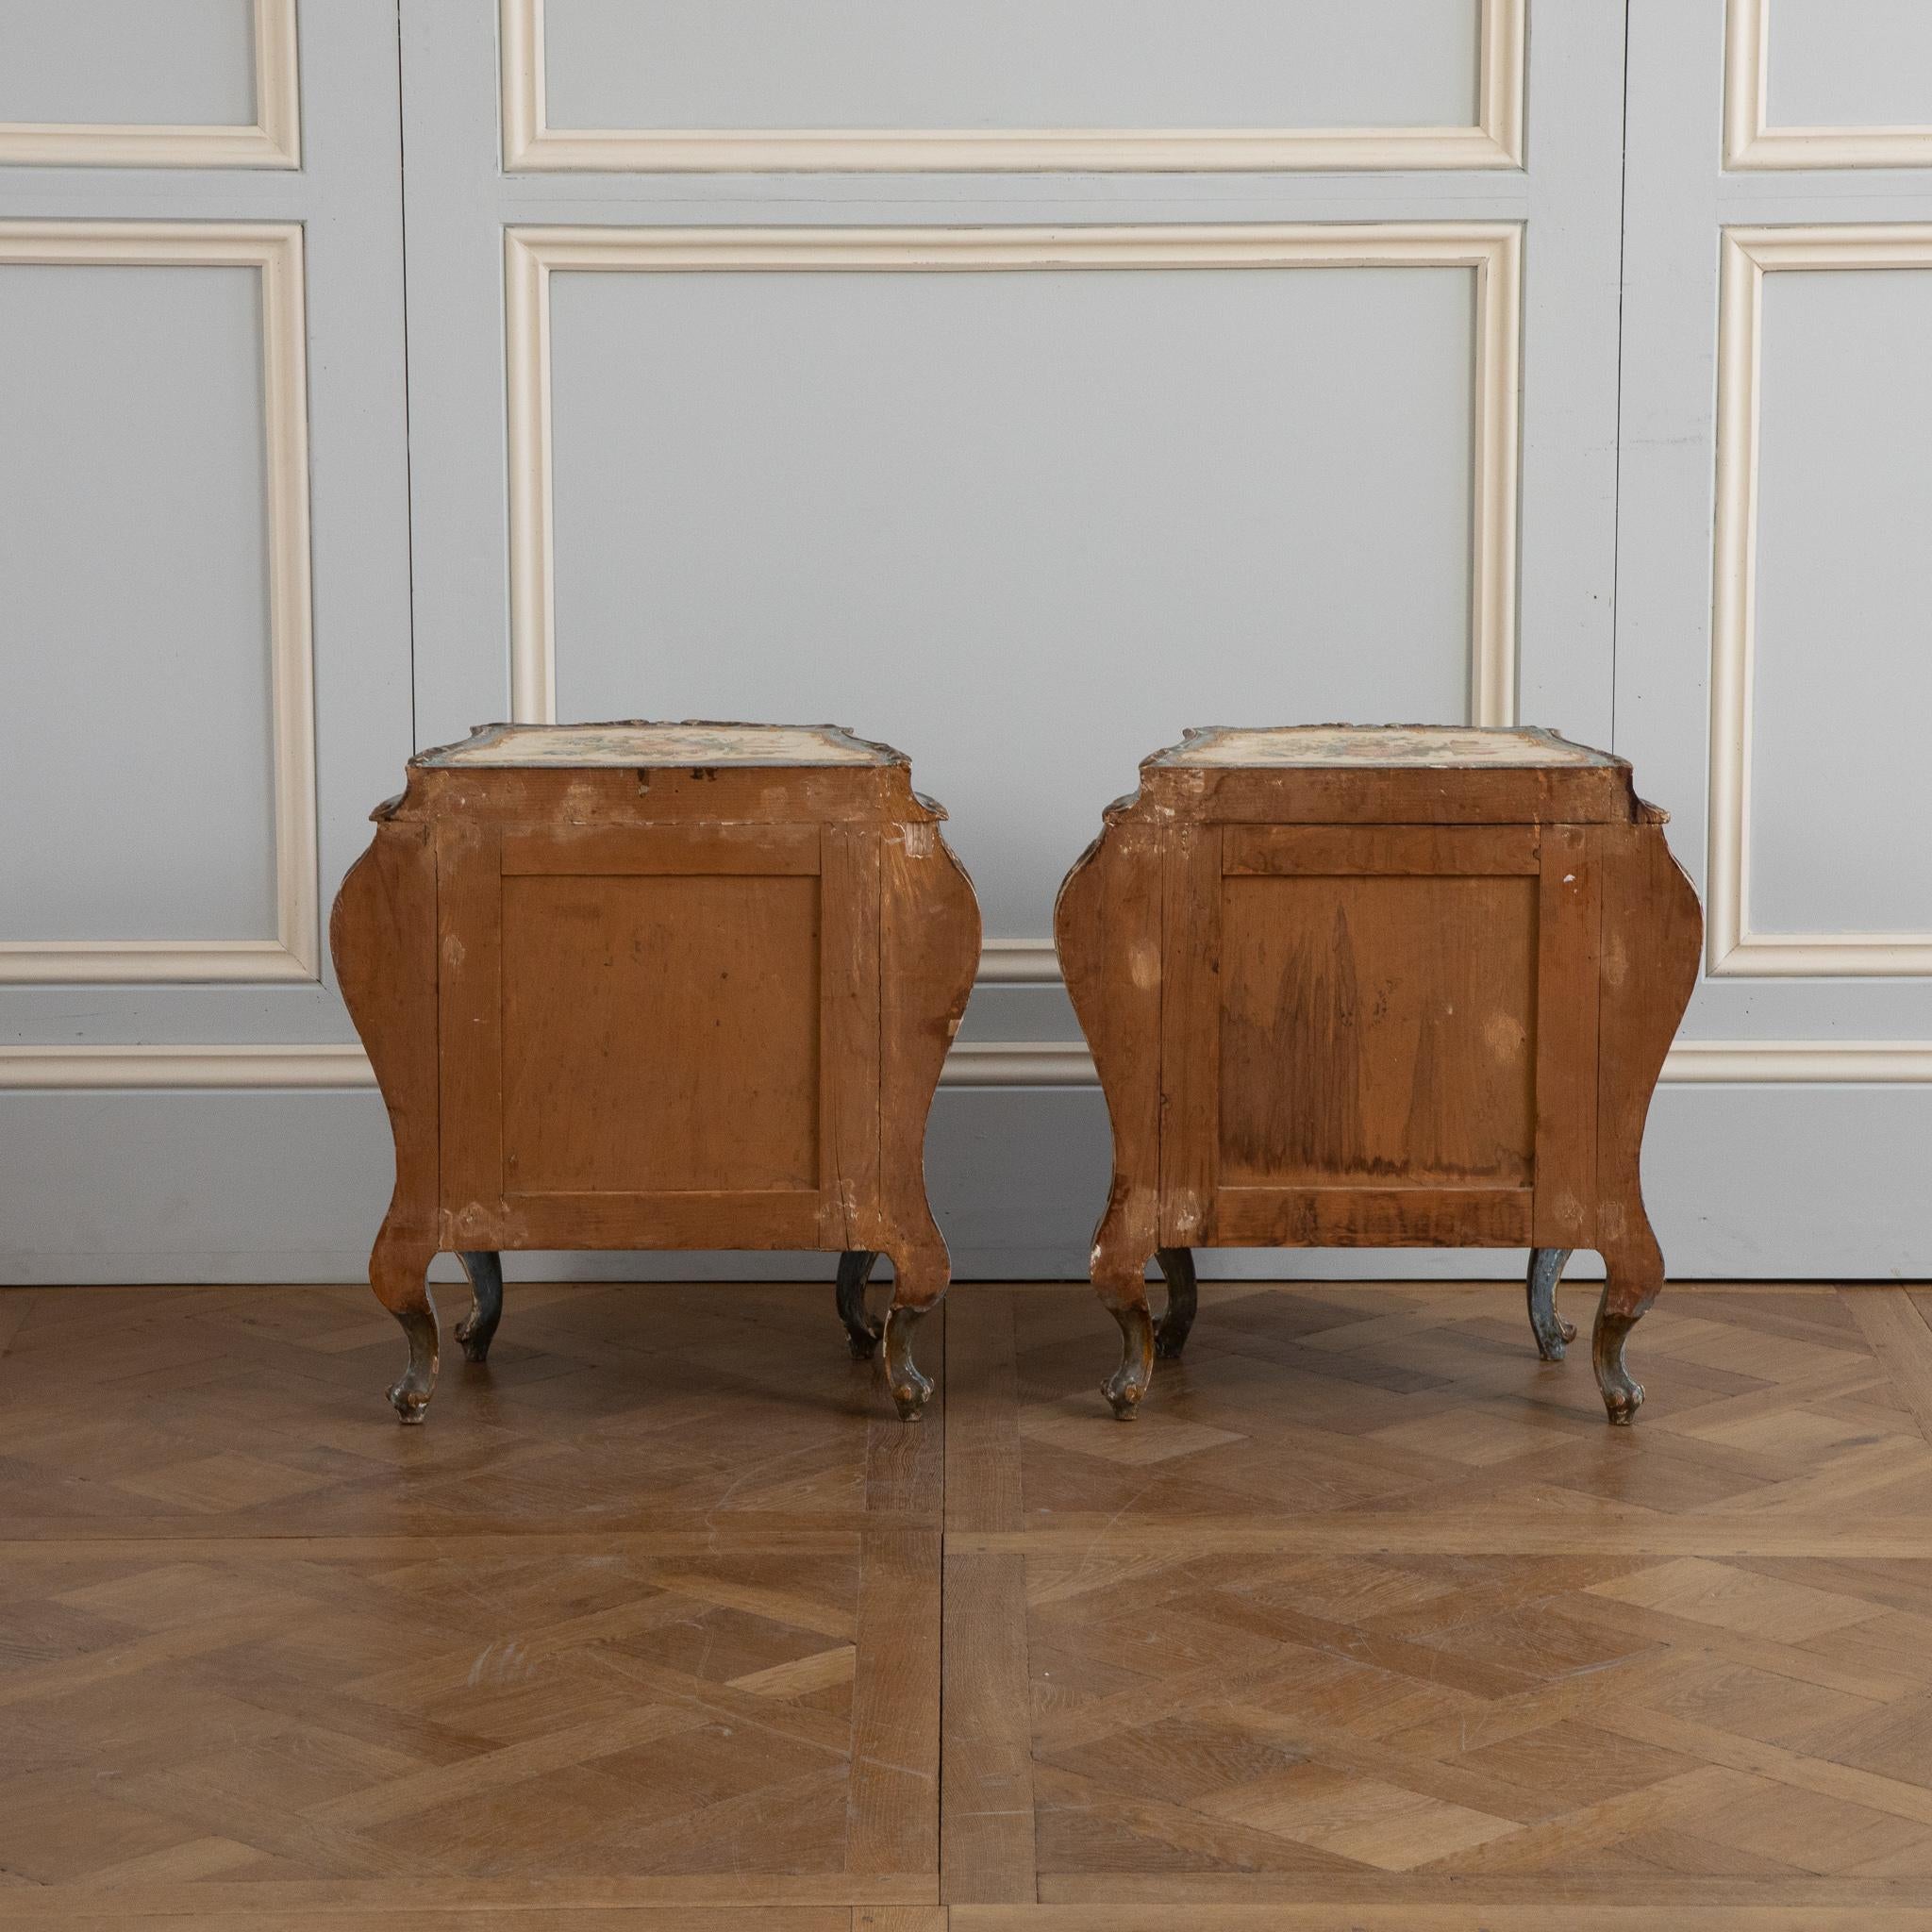 Hand-Painted Pair of Florentine Rococo Bedside Tables 'Night Stands'